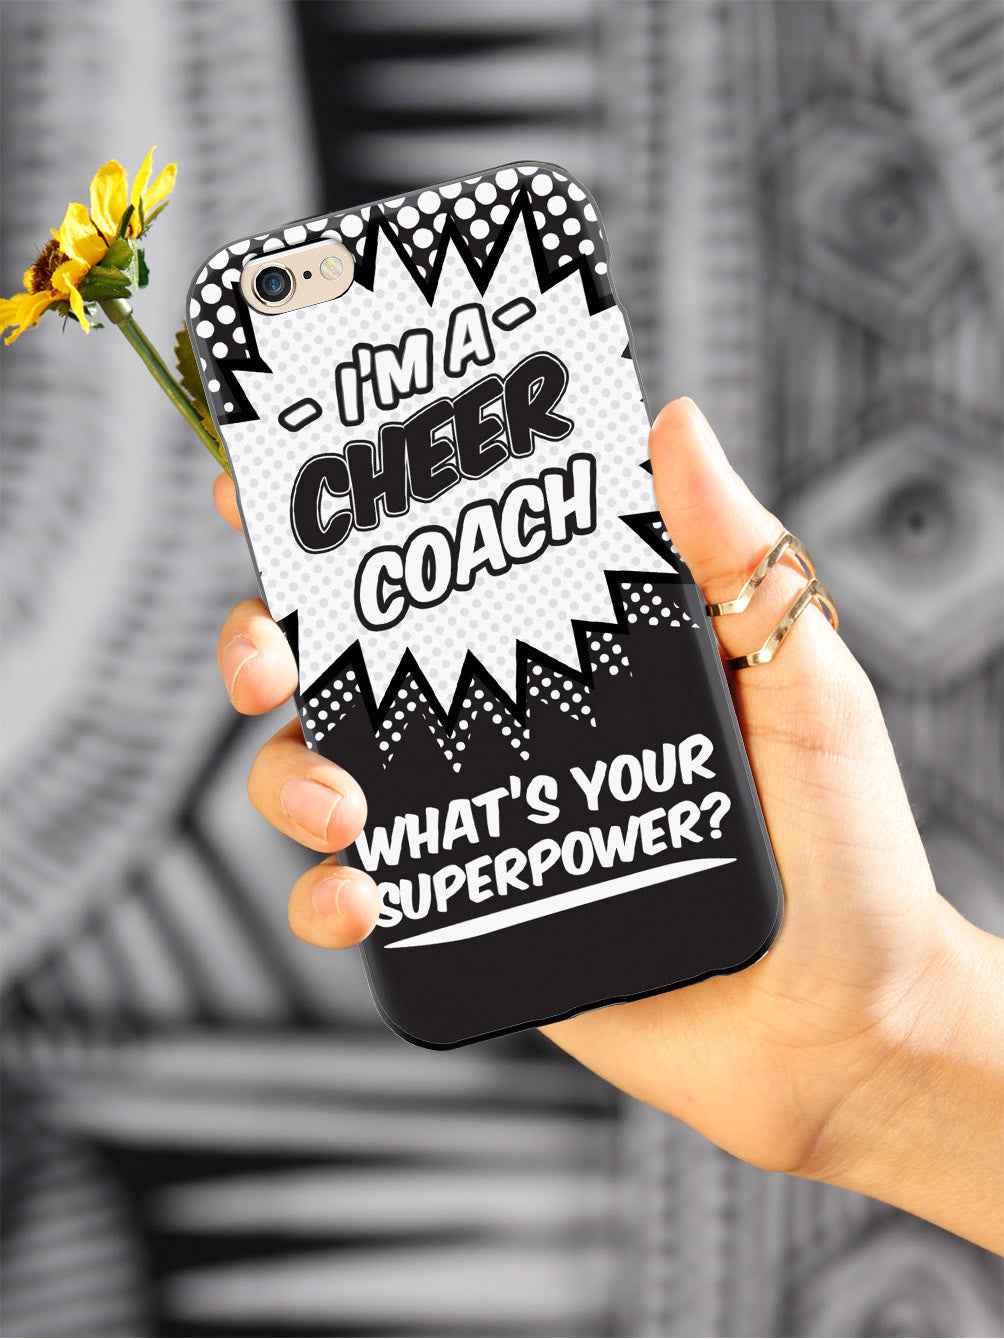 Cheer Coach - What's Your Superpower? Case